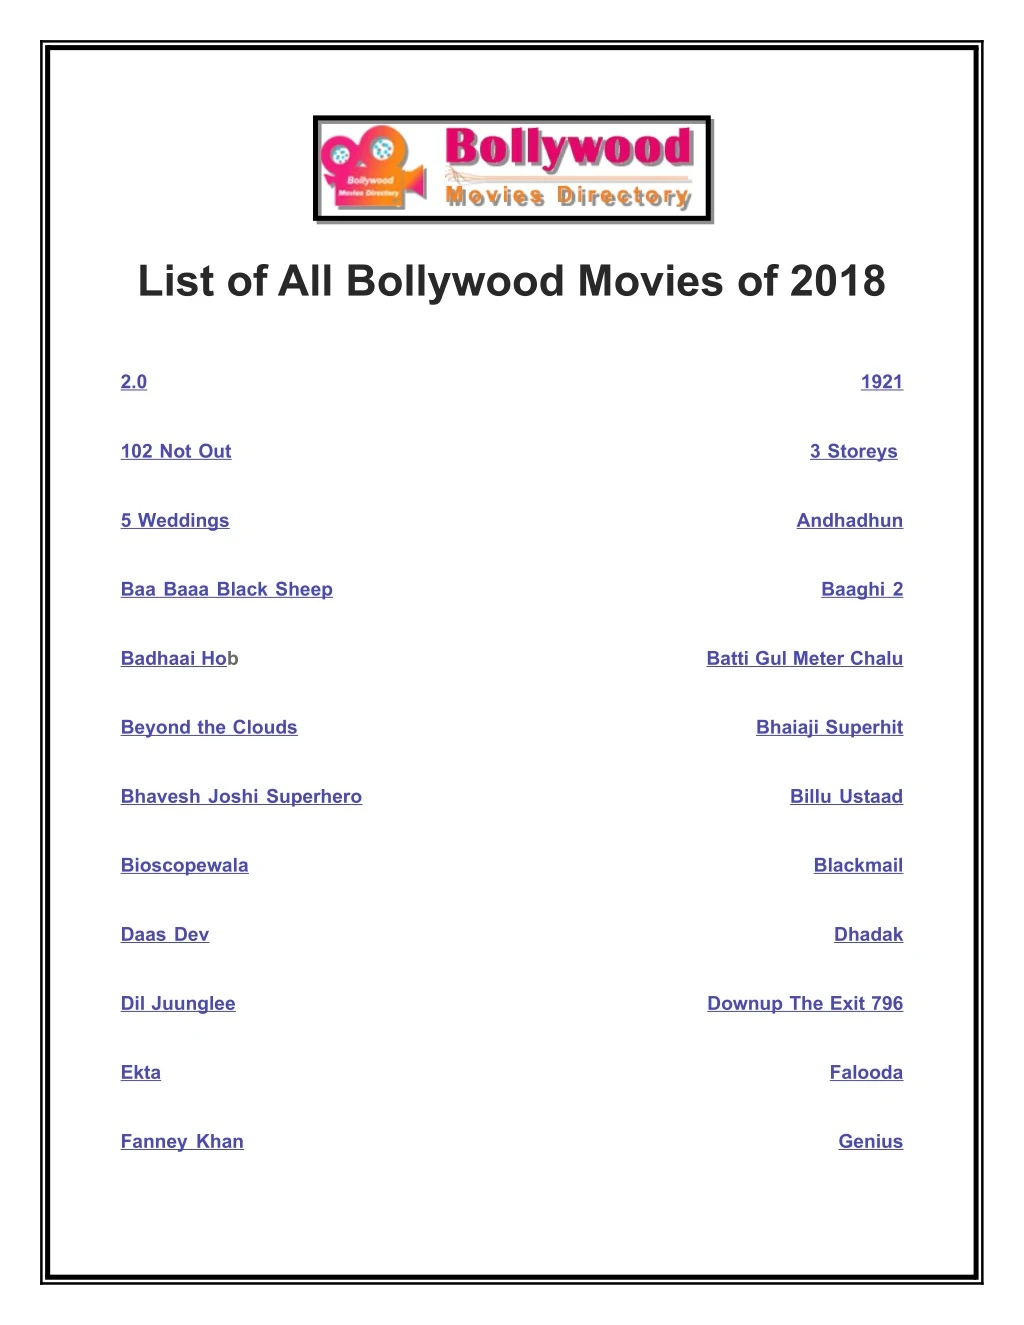 list of all bollywood movies of 2018